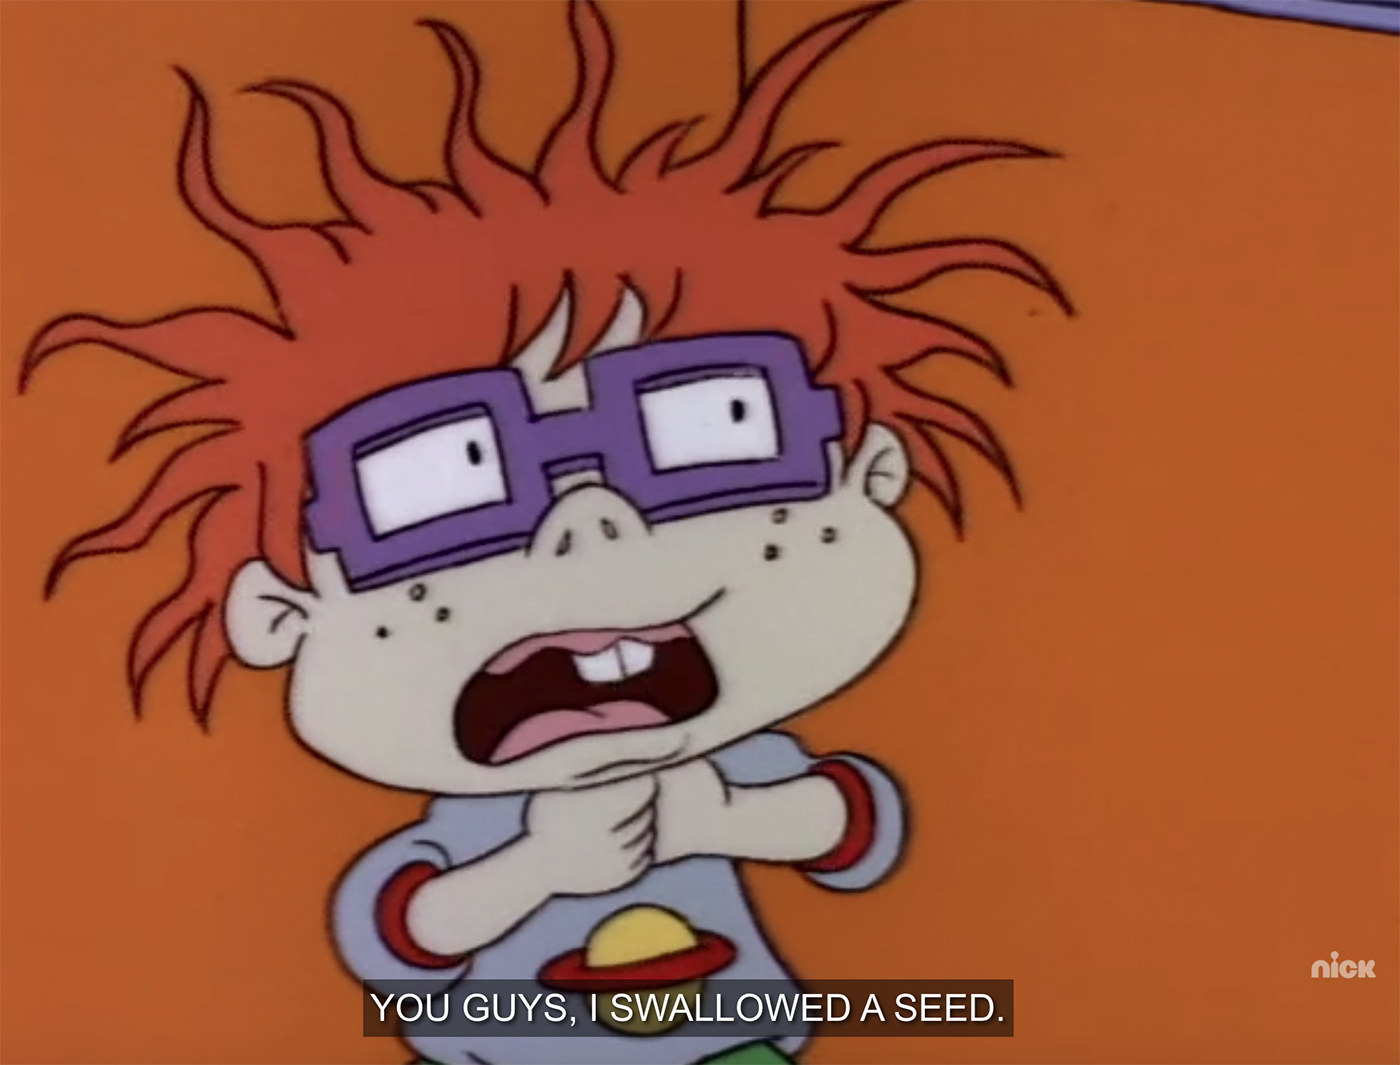 Chuckie from Rugrats complains about swallowing a watermelon seed